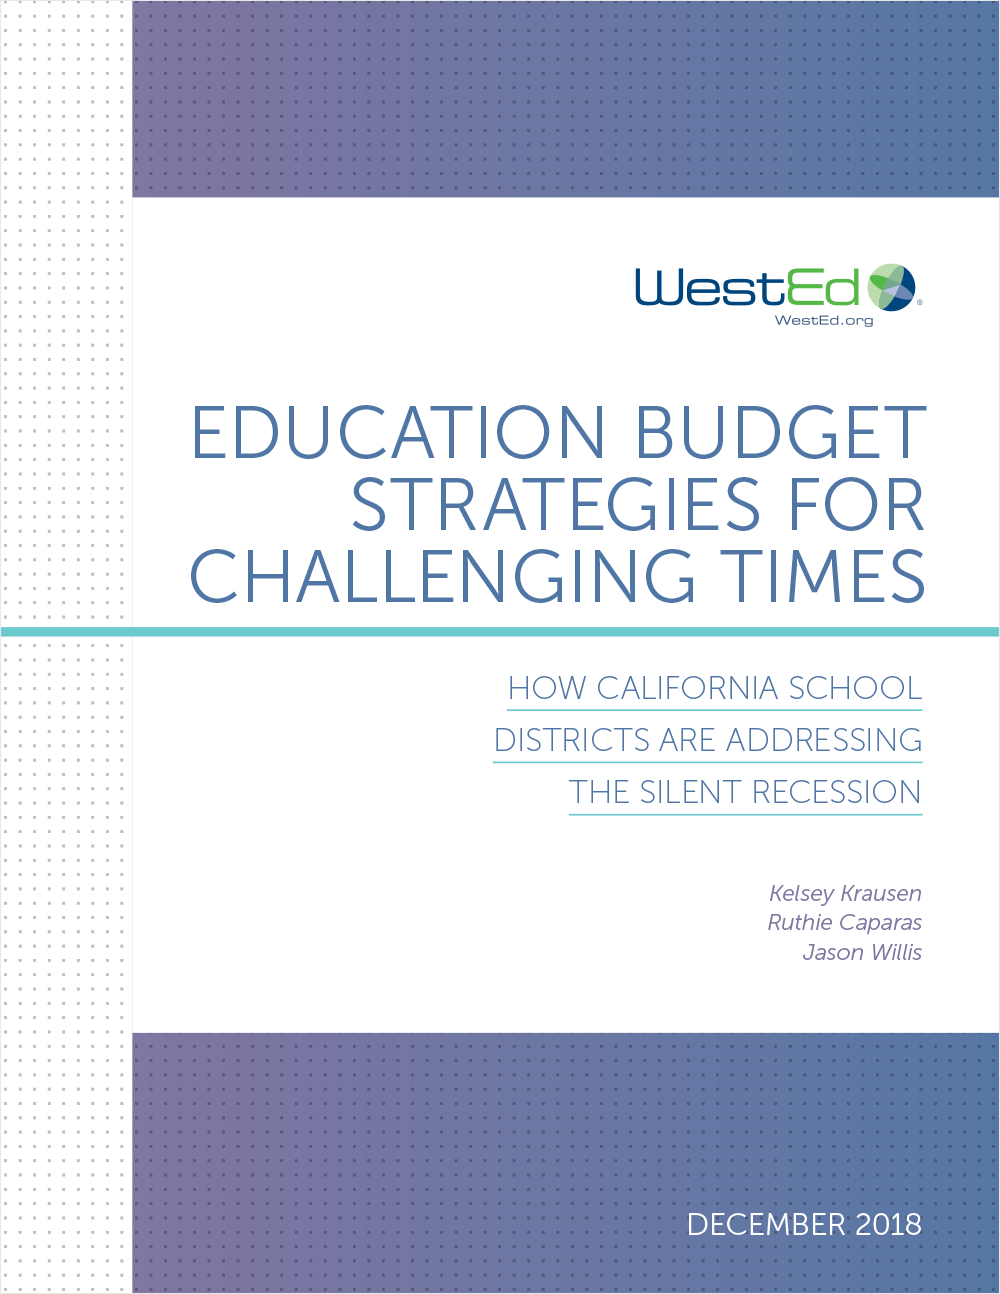 Education Budget Strategies for Challenging Times: How California School Districts Are Addressing the Silent Recession